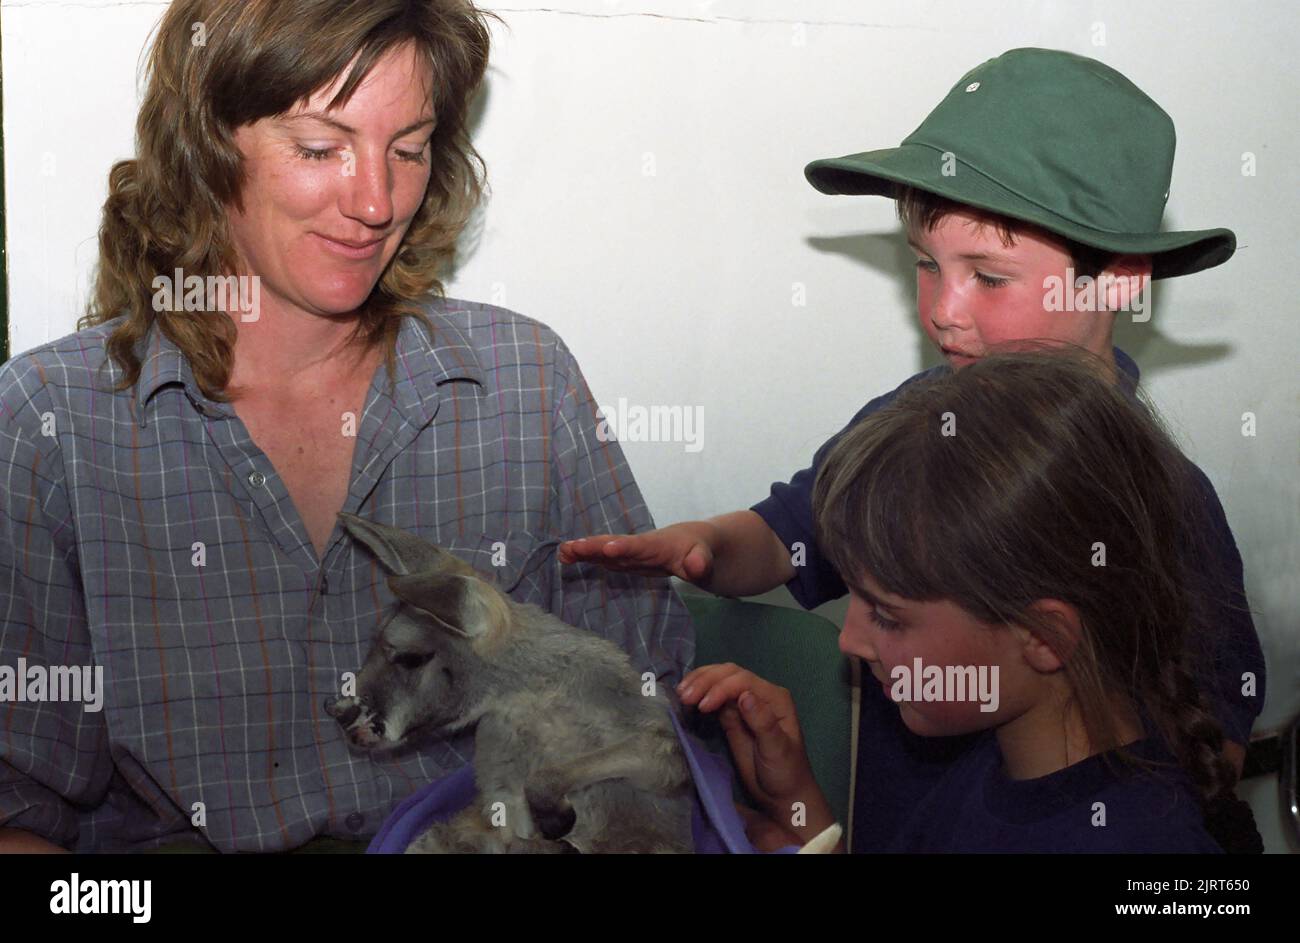 Rescued joey, called Boo the Roo, admired by two children and a carer, Urisino Station, New South Wales, Australia. Stock Photo